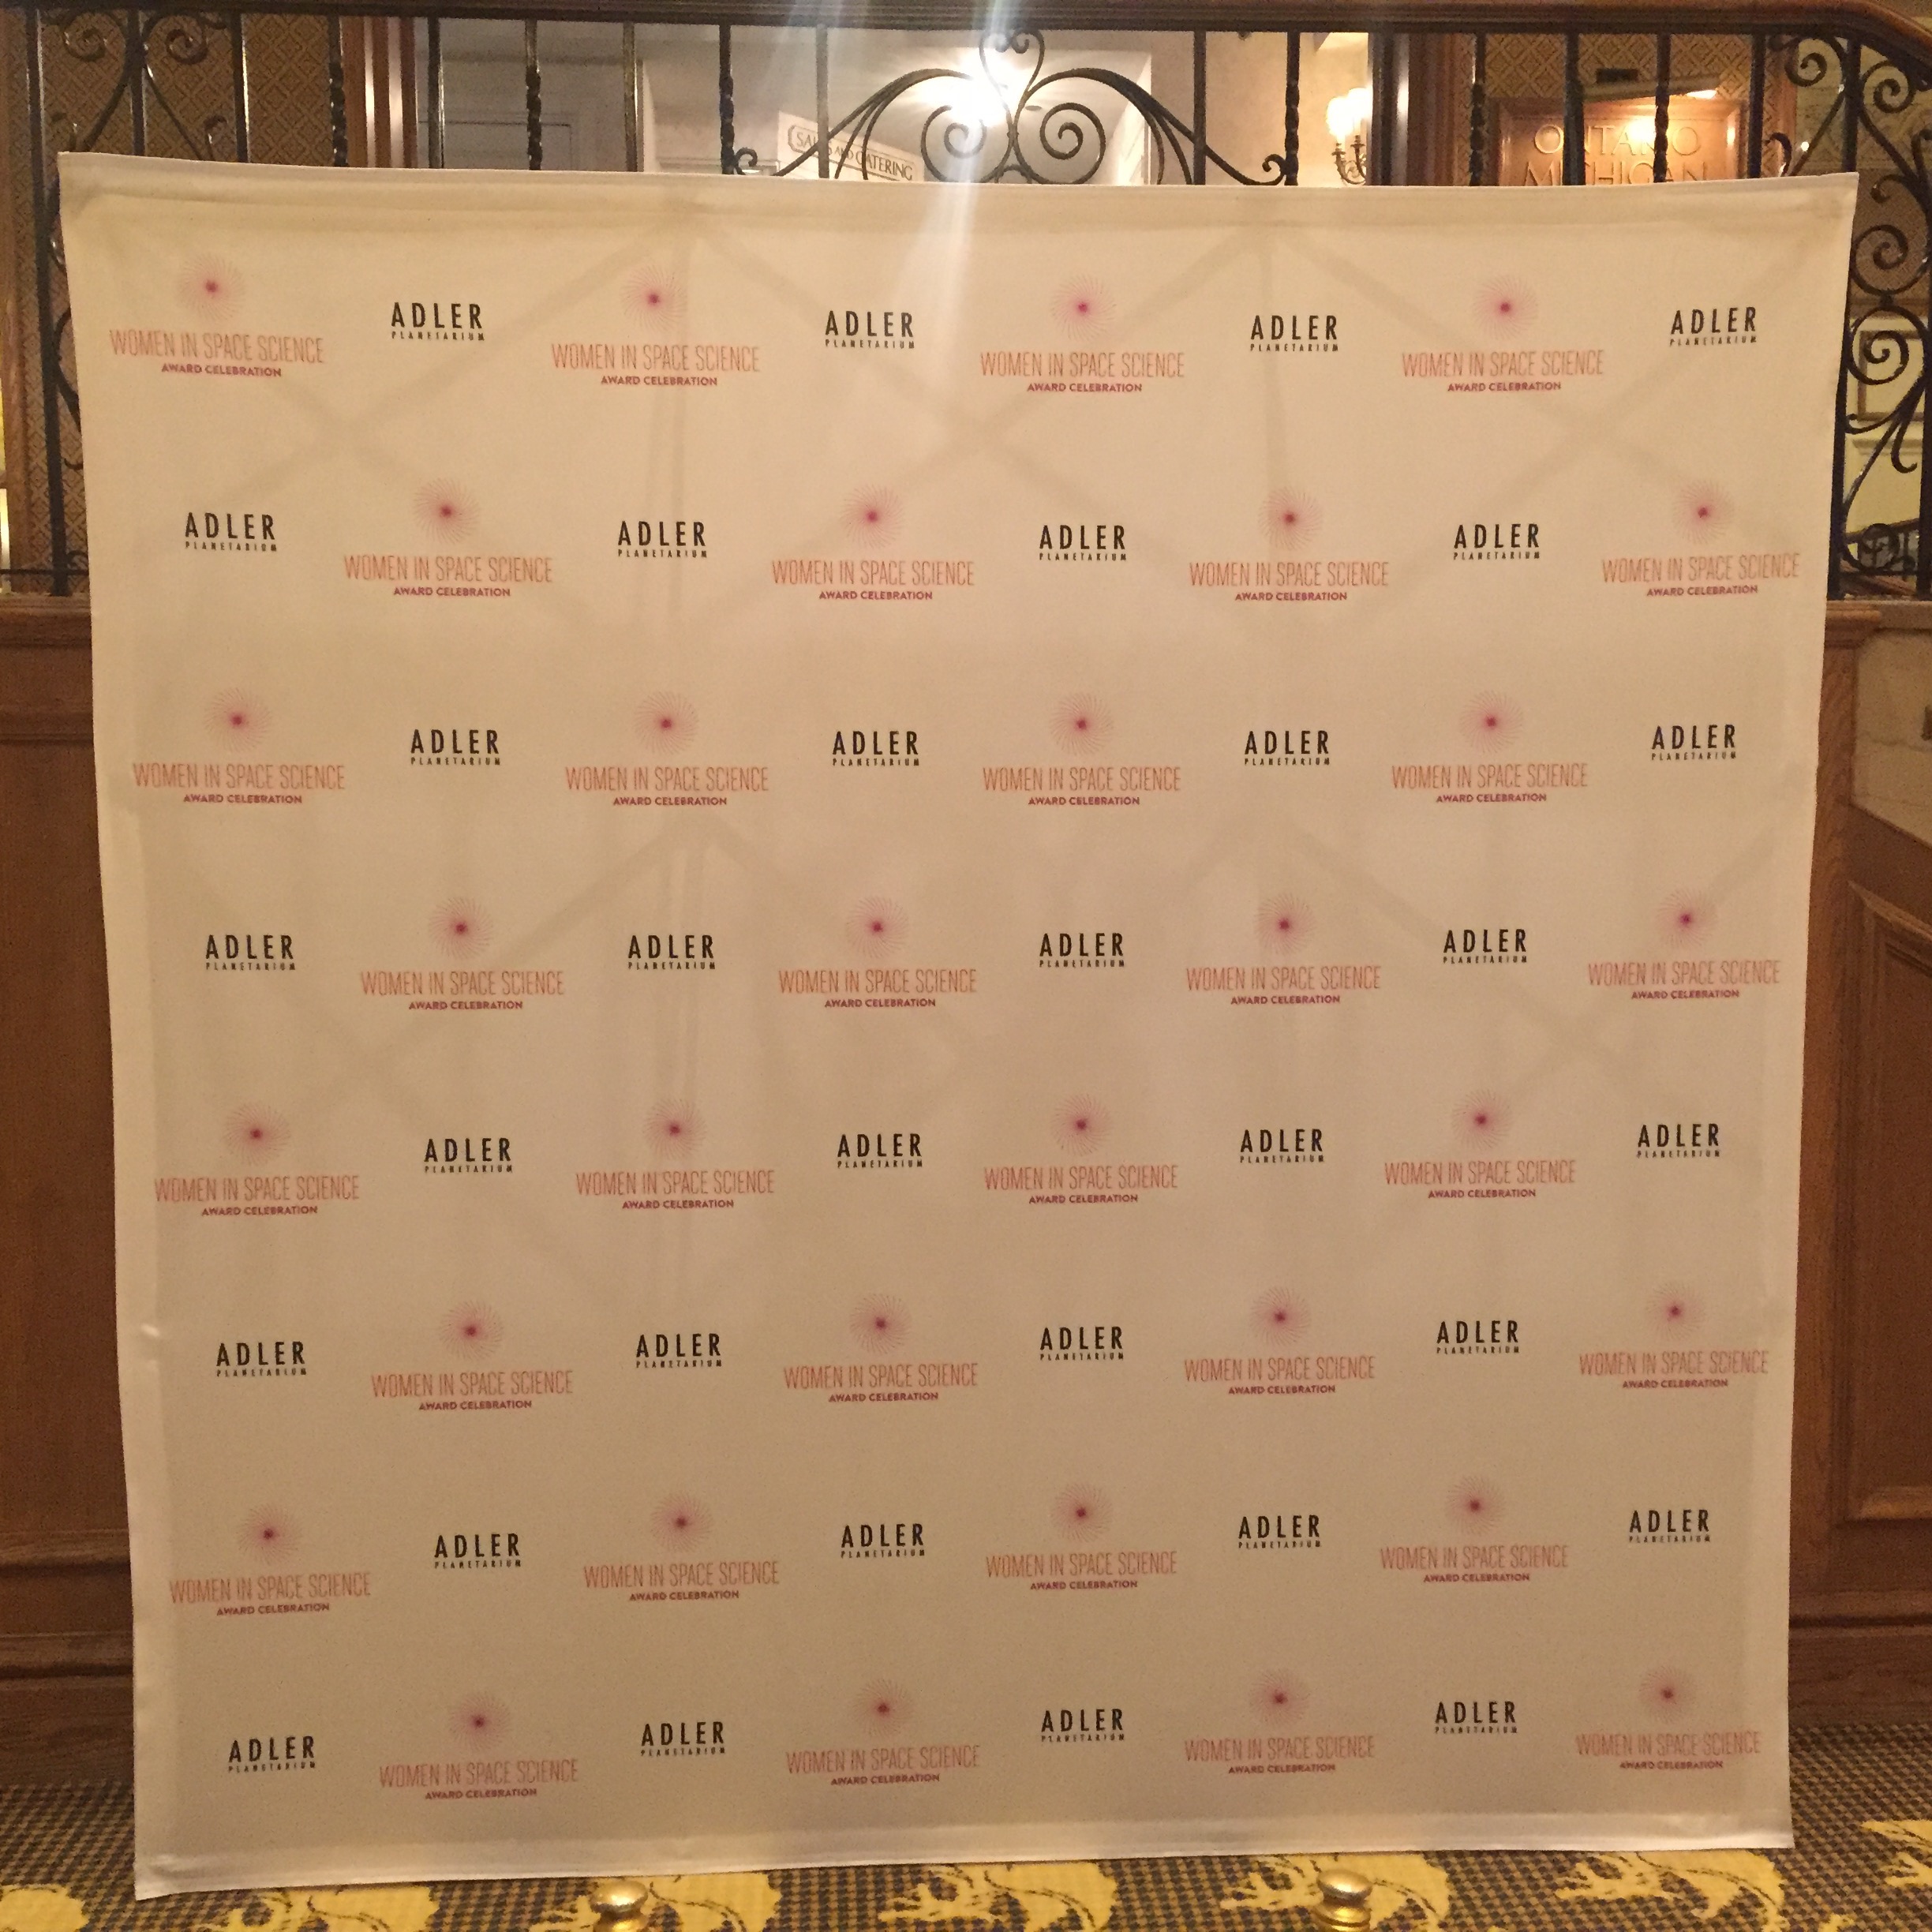 A step and repeat banner for Adler and Women in Space Science